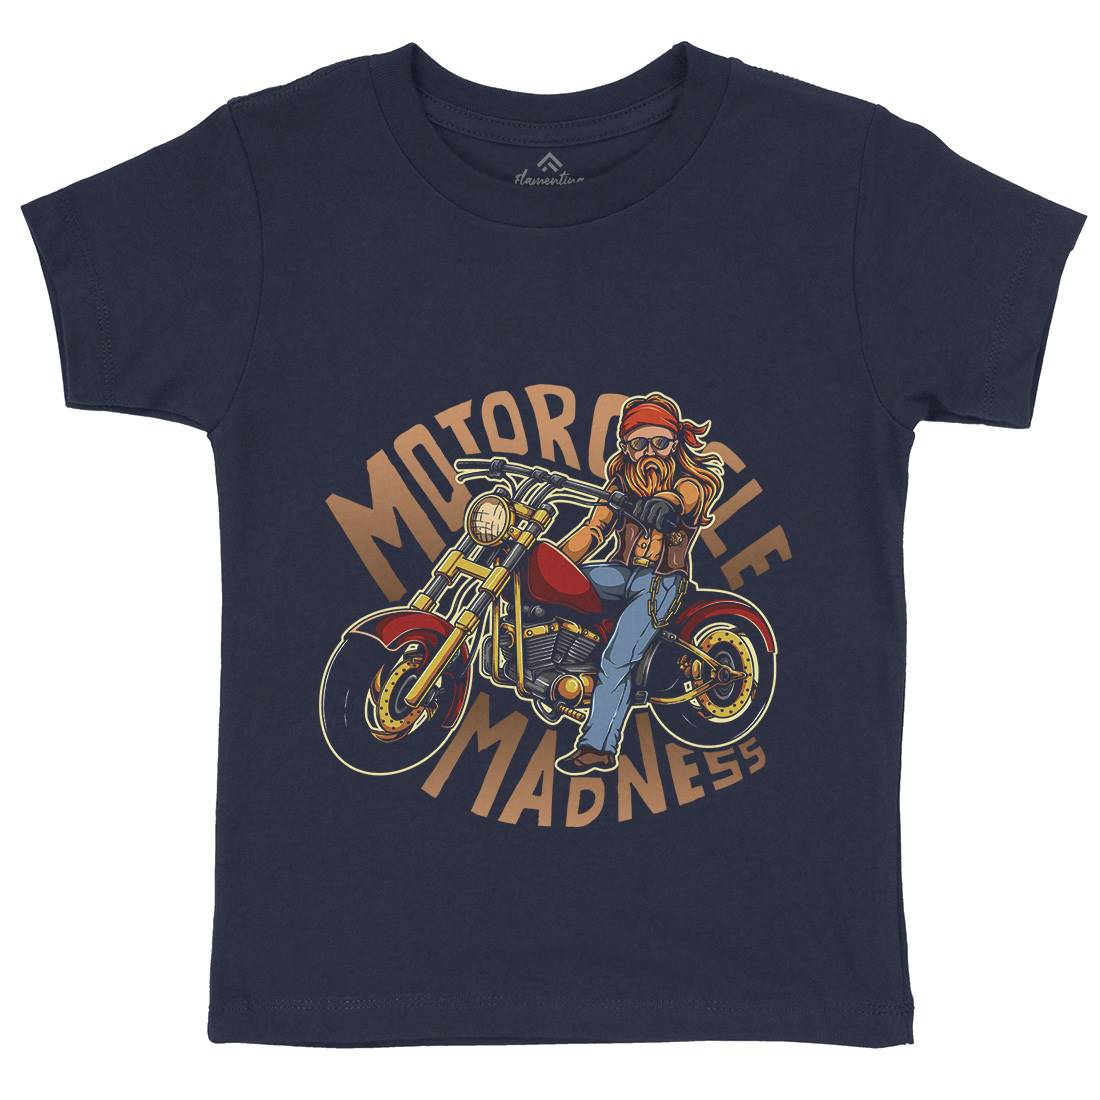 Madness Kids Crew Neck T-Shirt Motorcycles A438